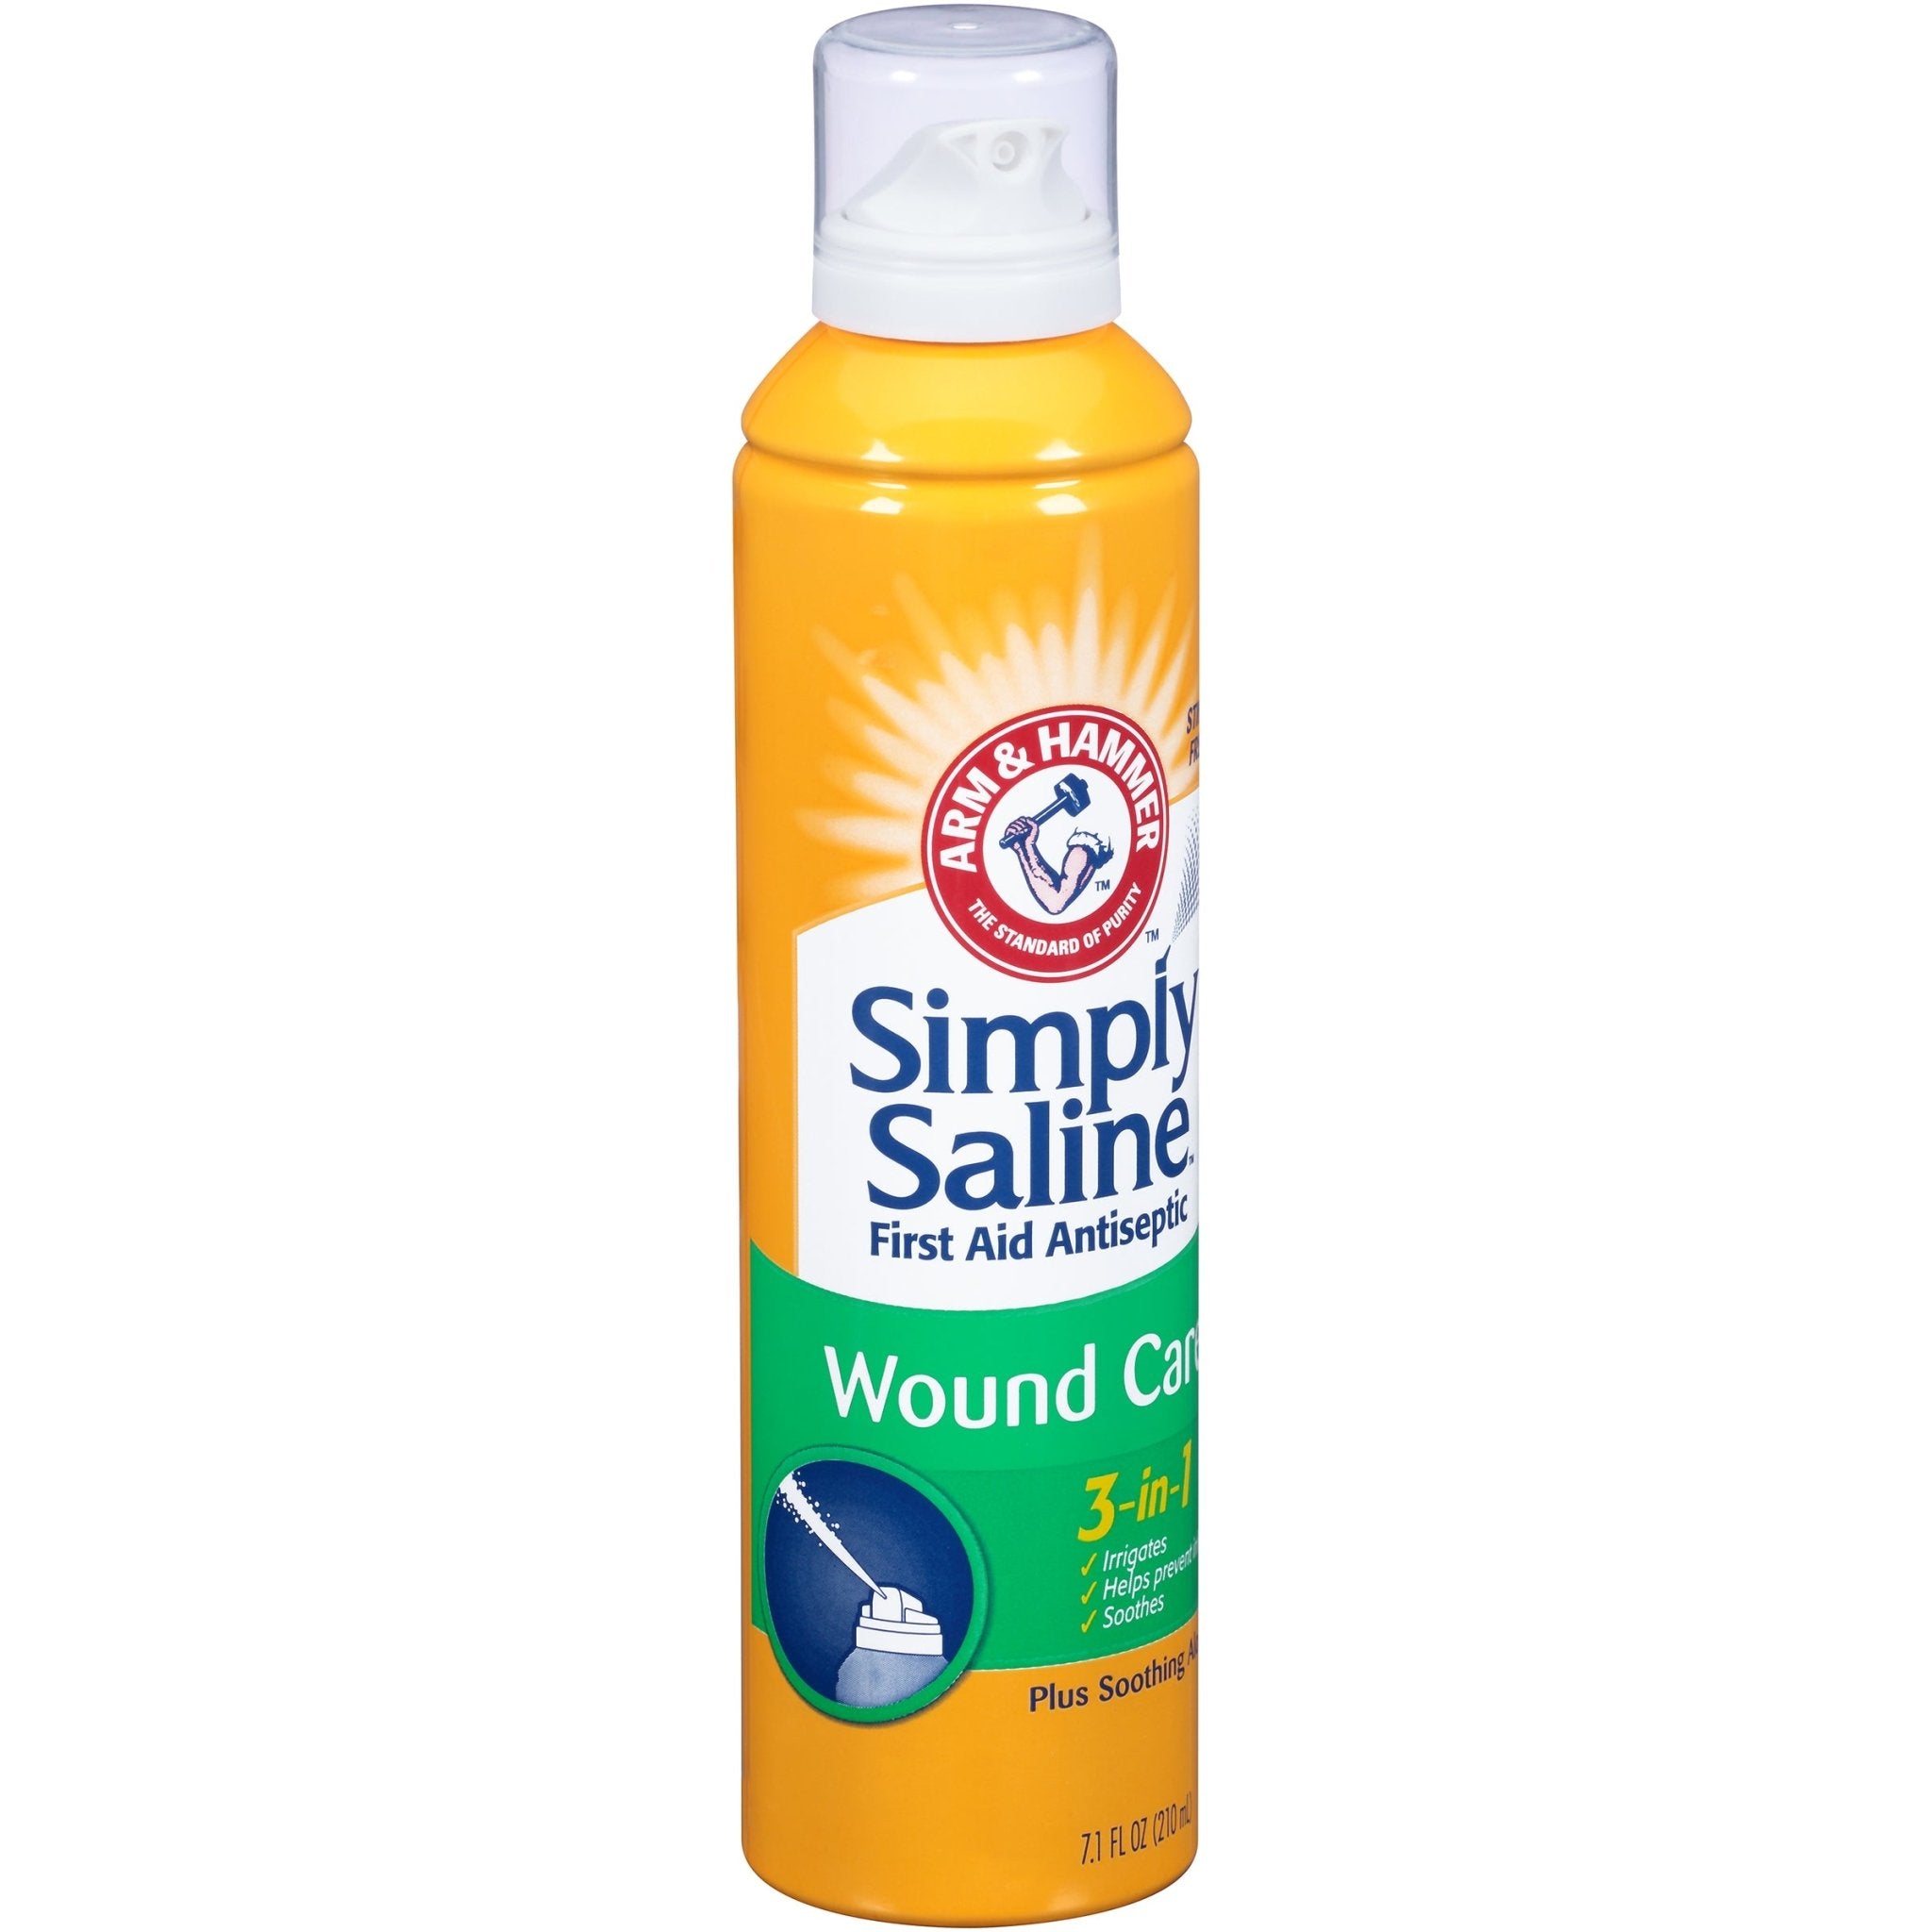 EA/1 - Church & Dwight Simply Saline 3 in 1 Wound Wash, 7.1 oz - Best Buy Medical Supplies